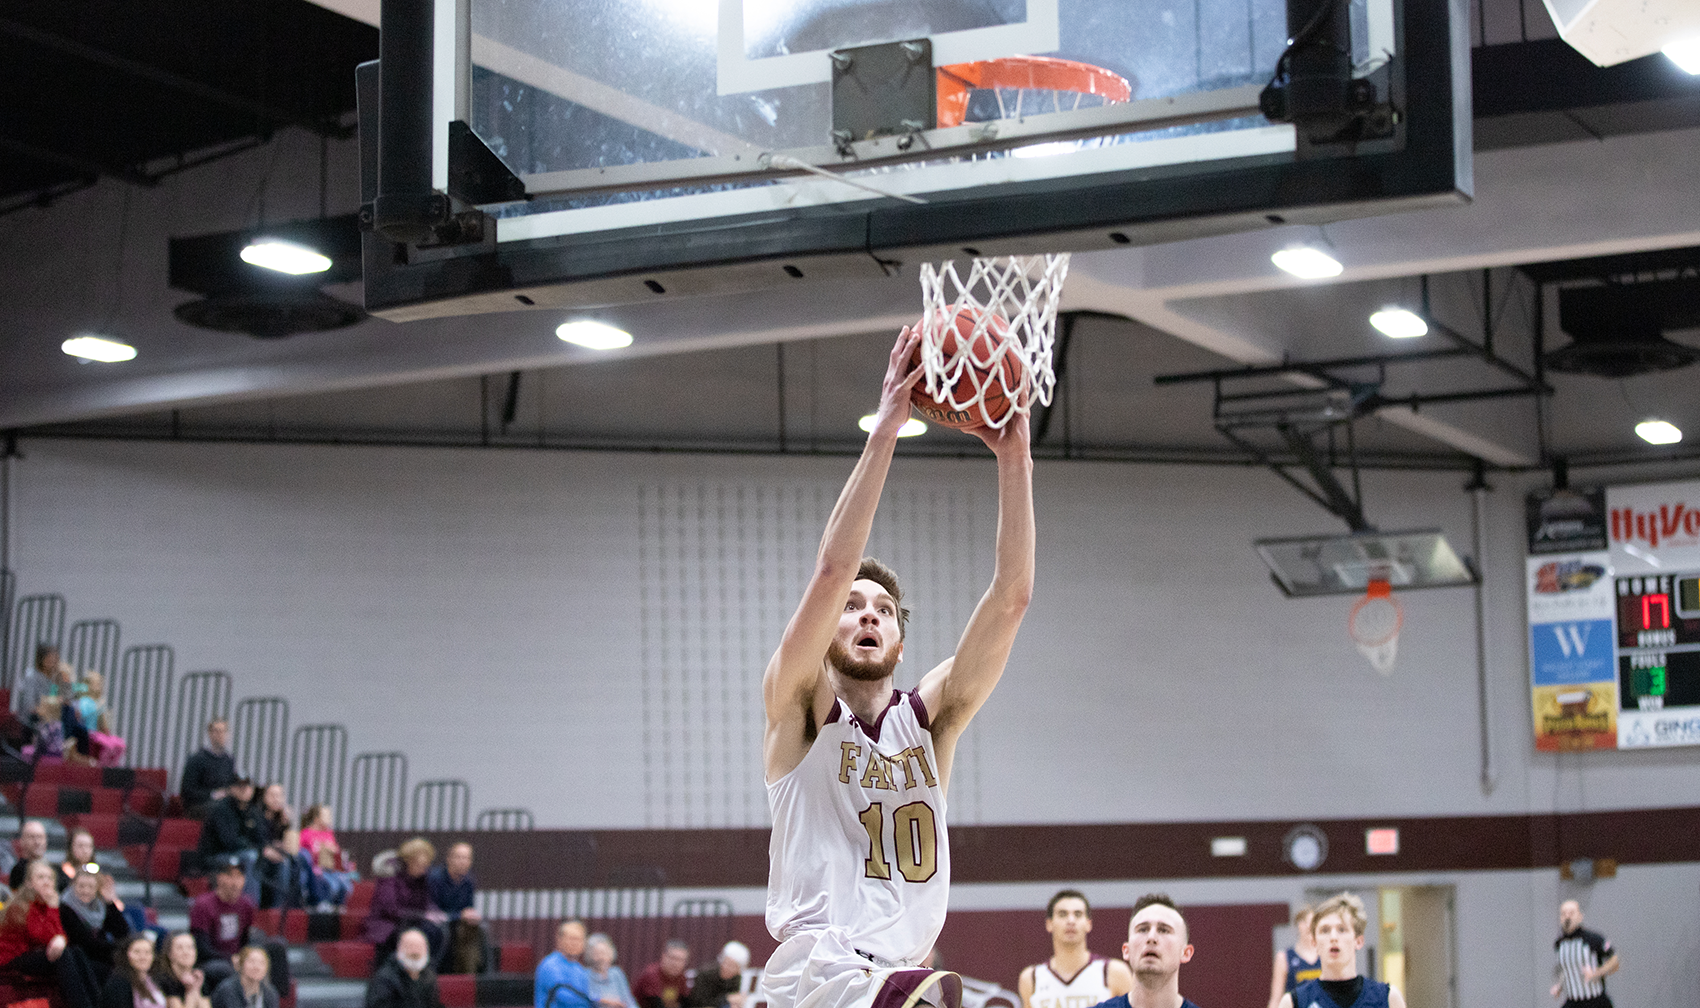 Christian Brown's dunk sparked the Eagles to a win over Spurgeon College.